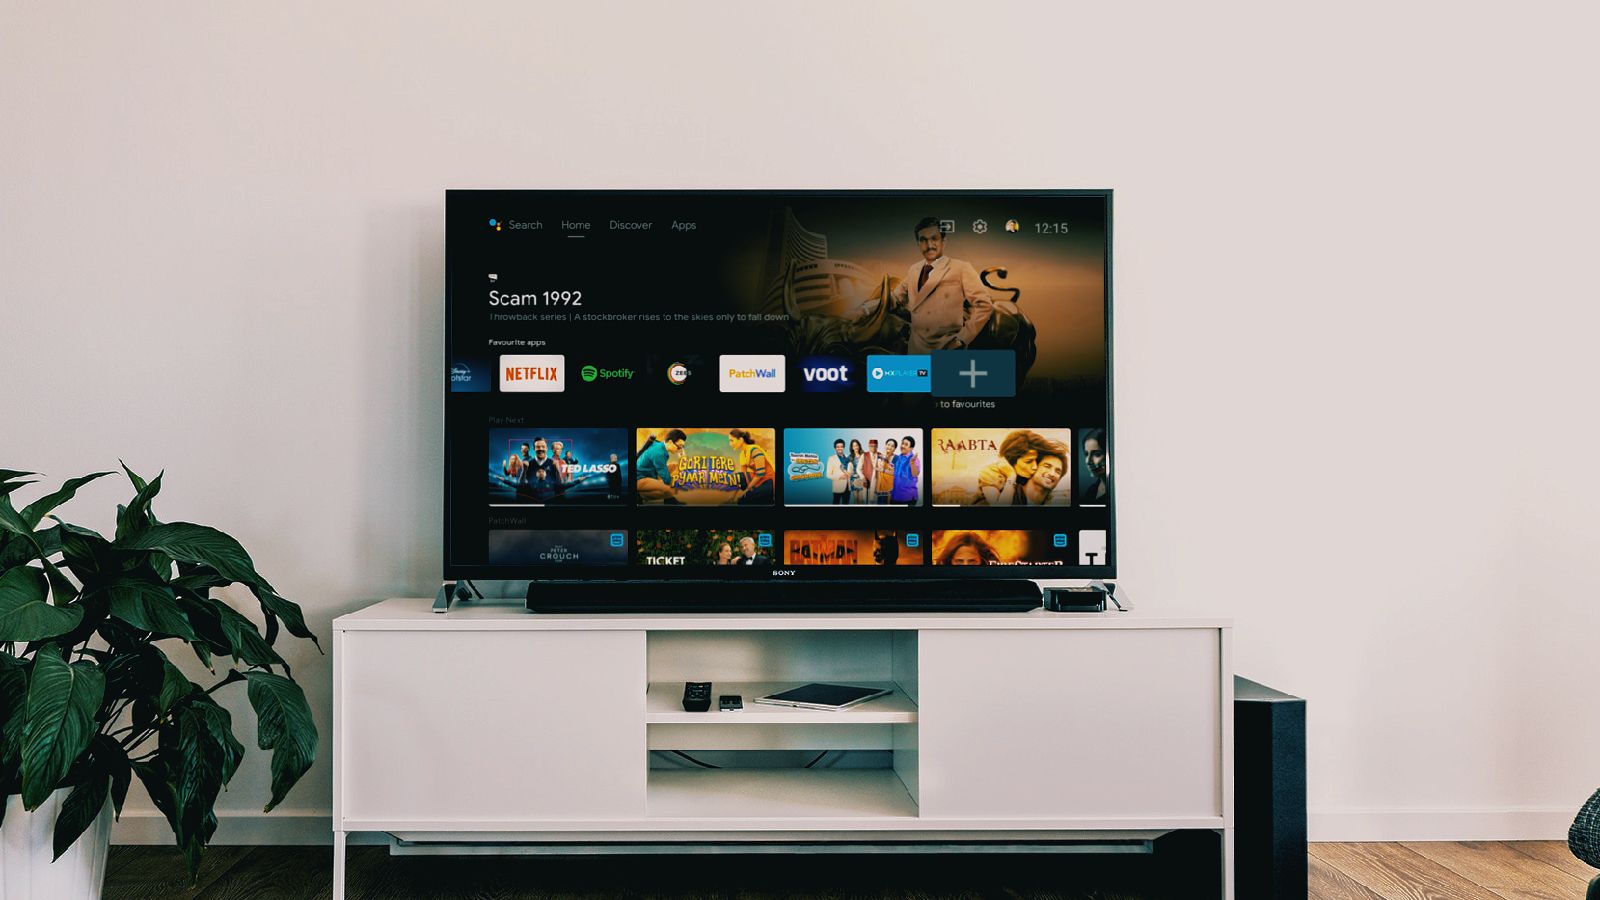 How to see who else is using your streaming services